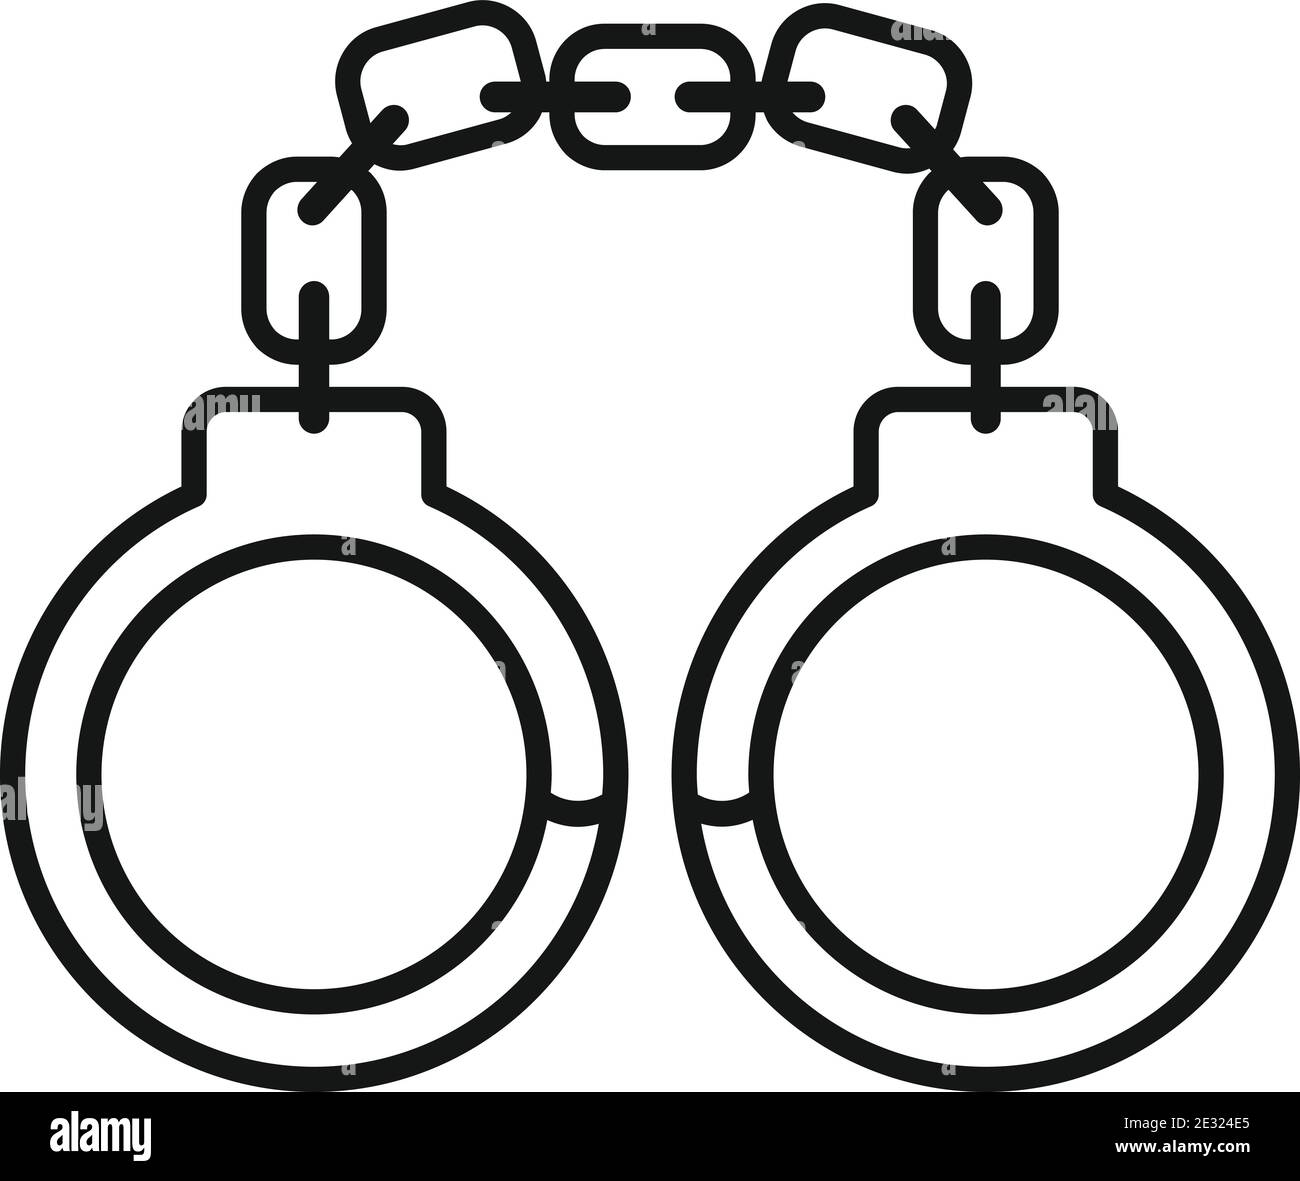 Policeman handcuffs icon, outline style Stock Vector